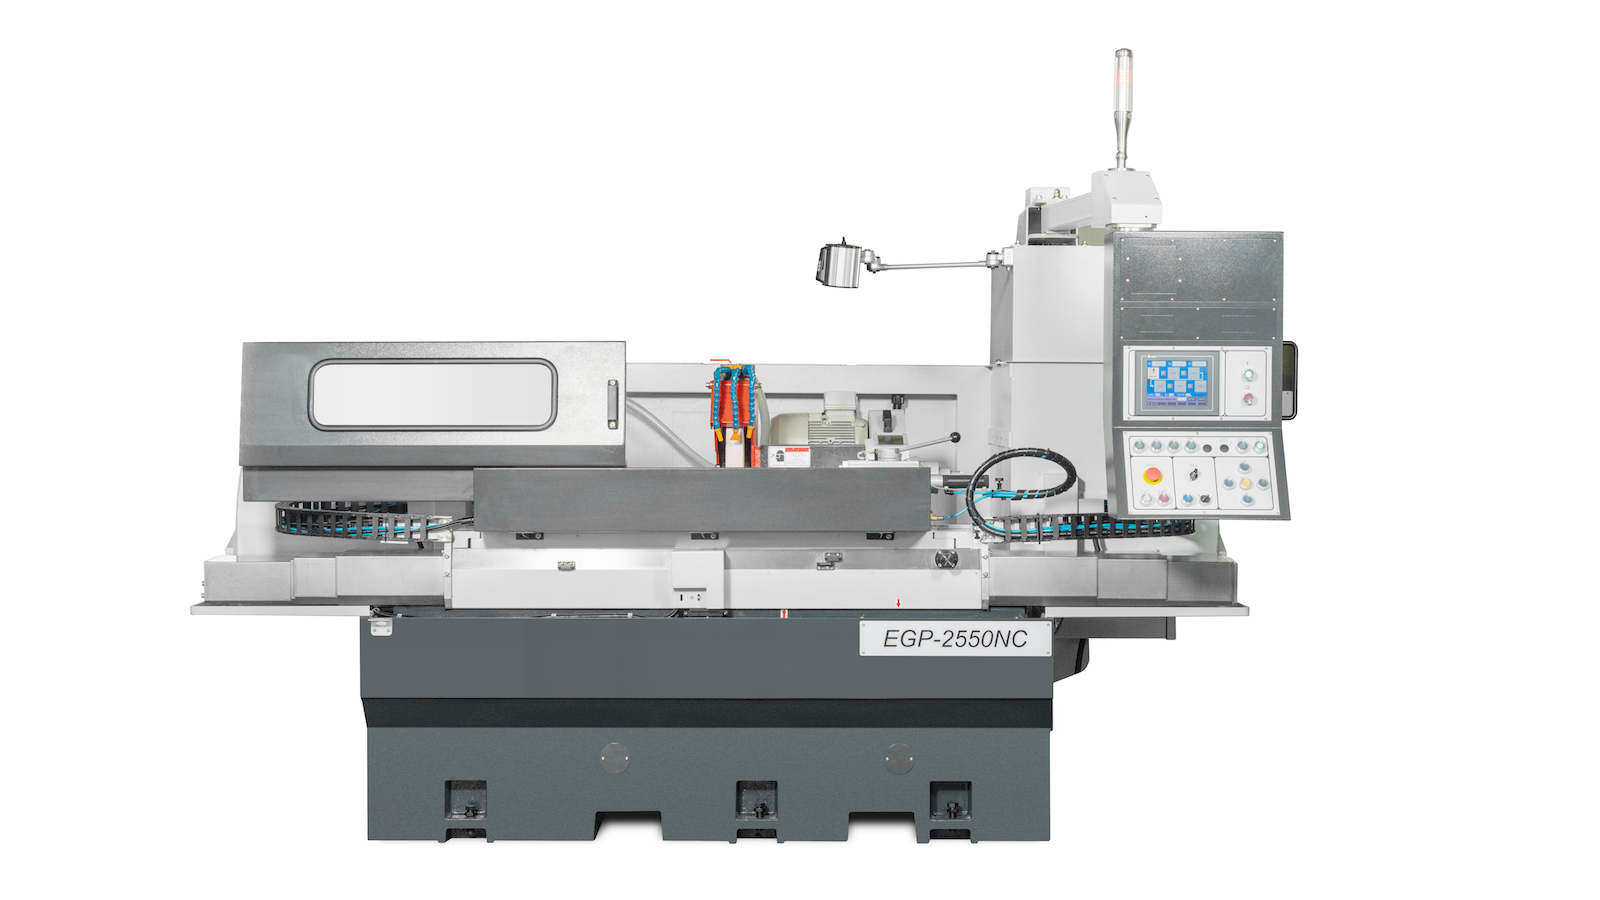 Suppliers of CNC Grinding Machine Options